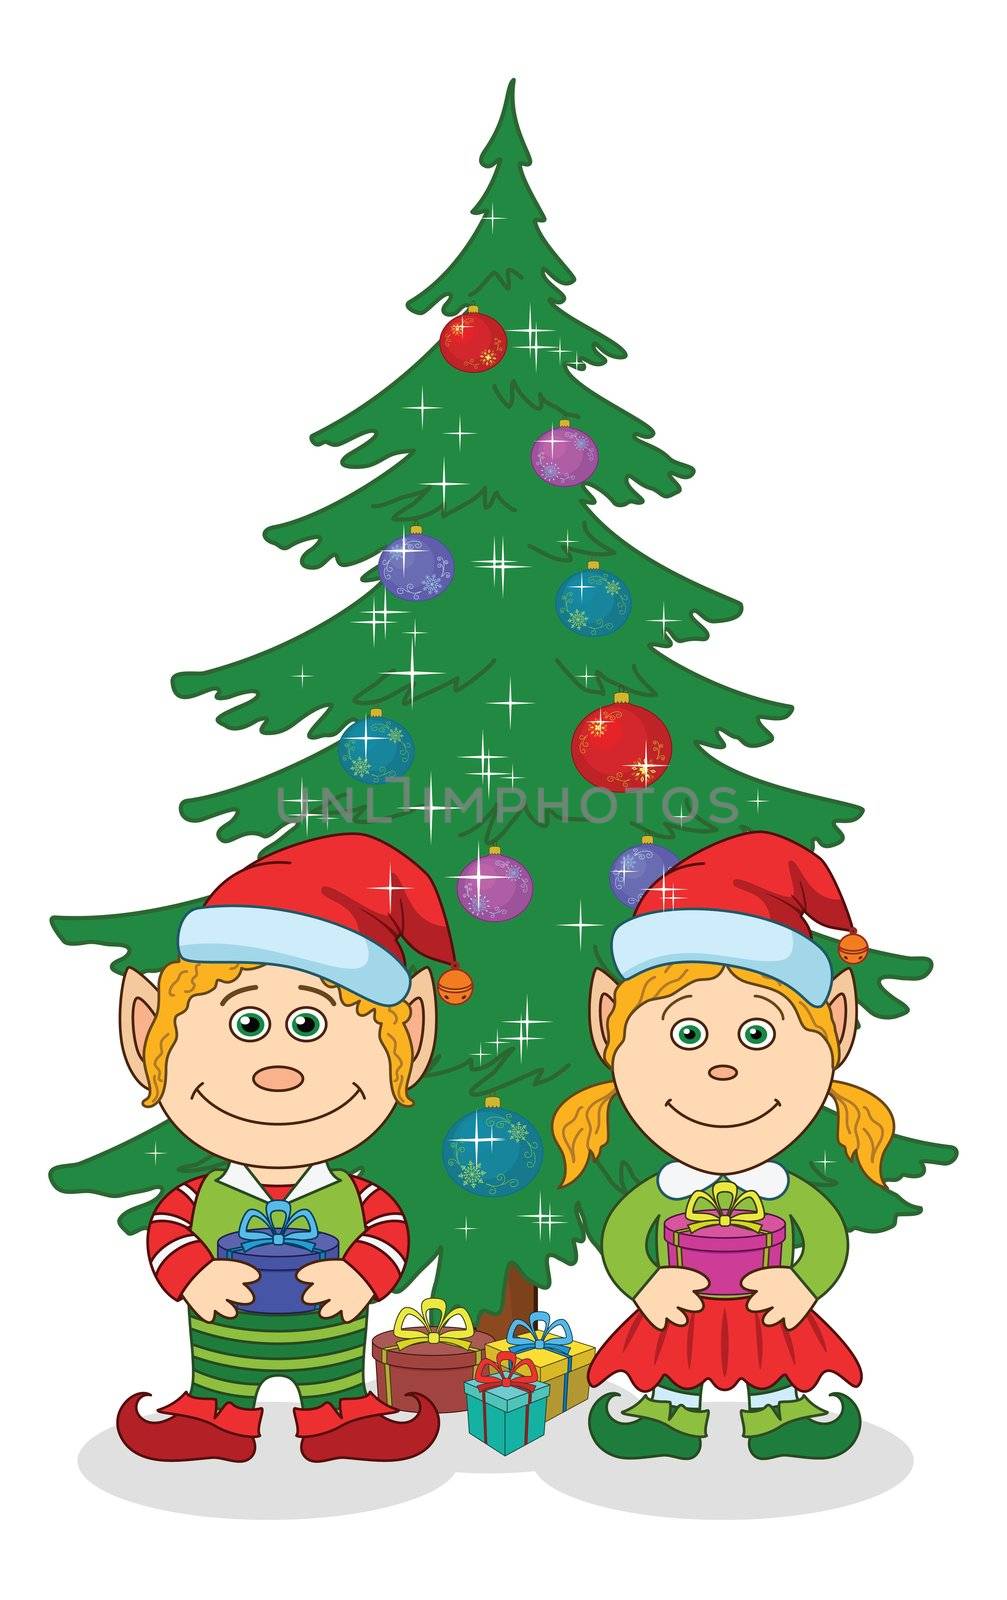 Christmas elves and fir tree by alexcoolok